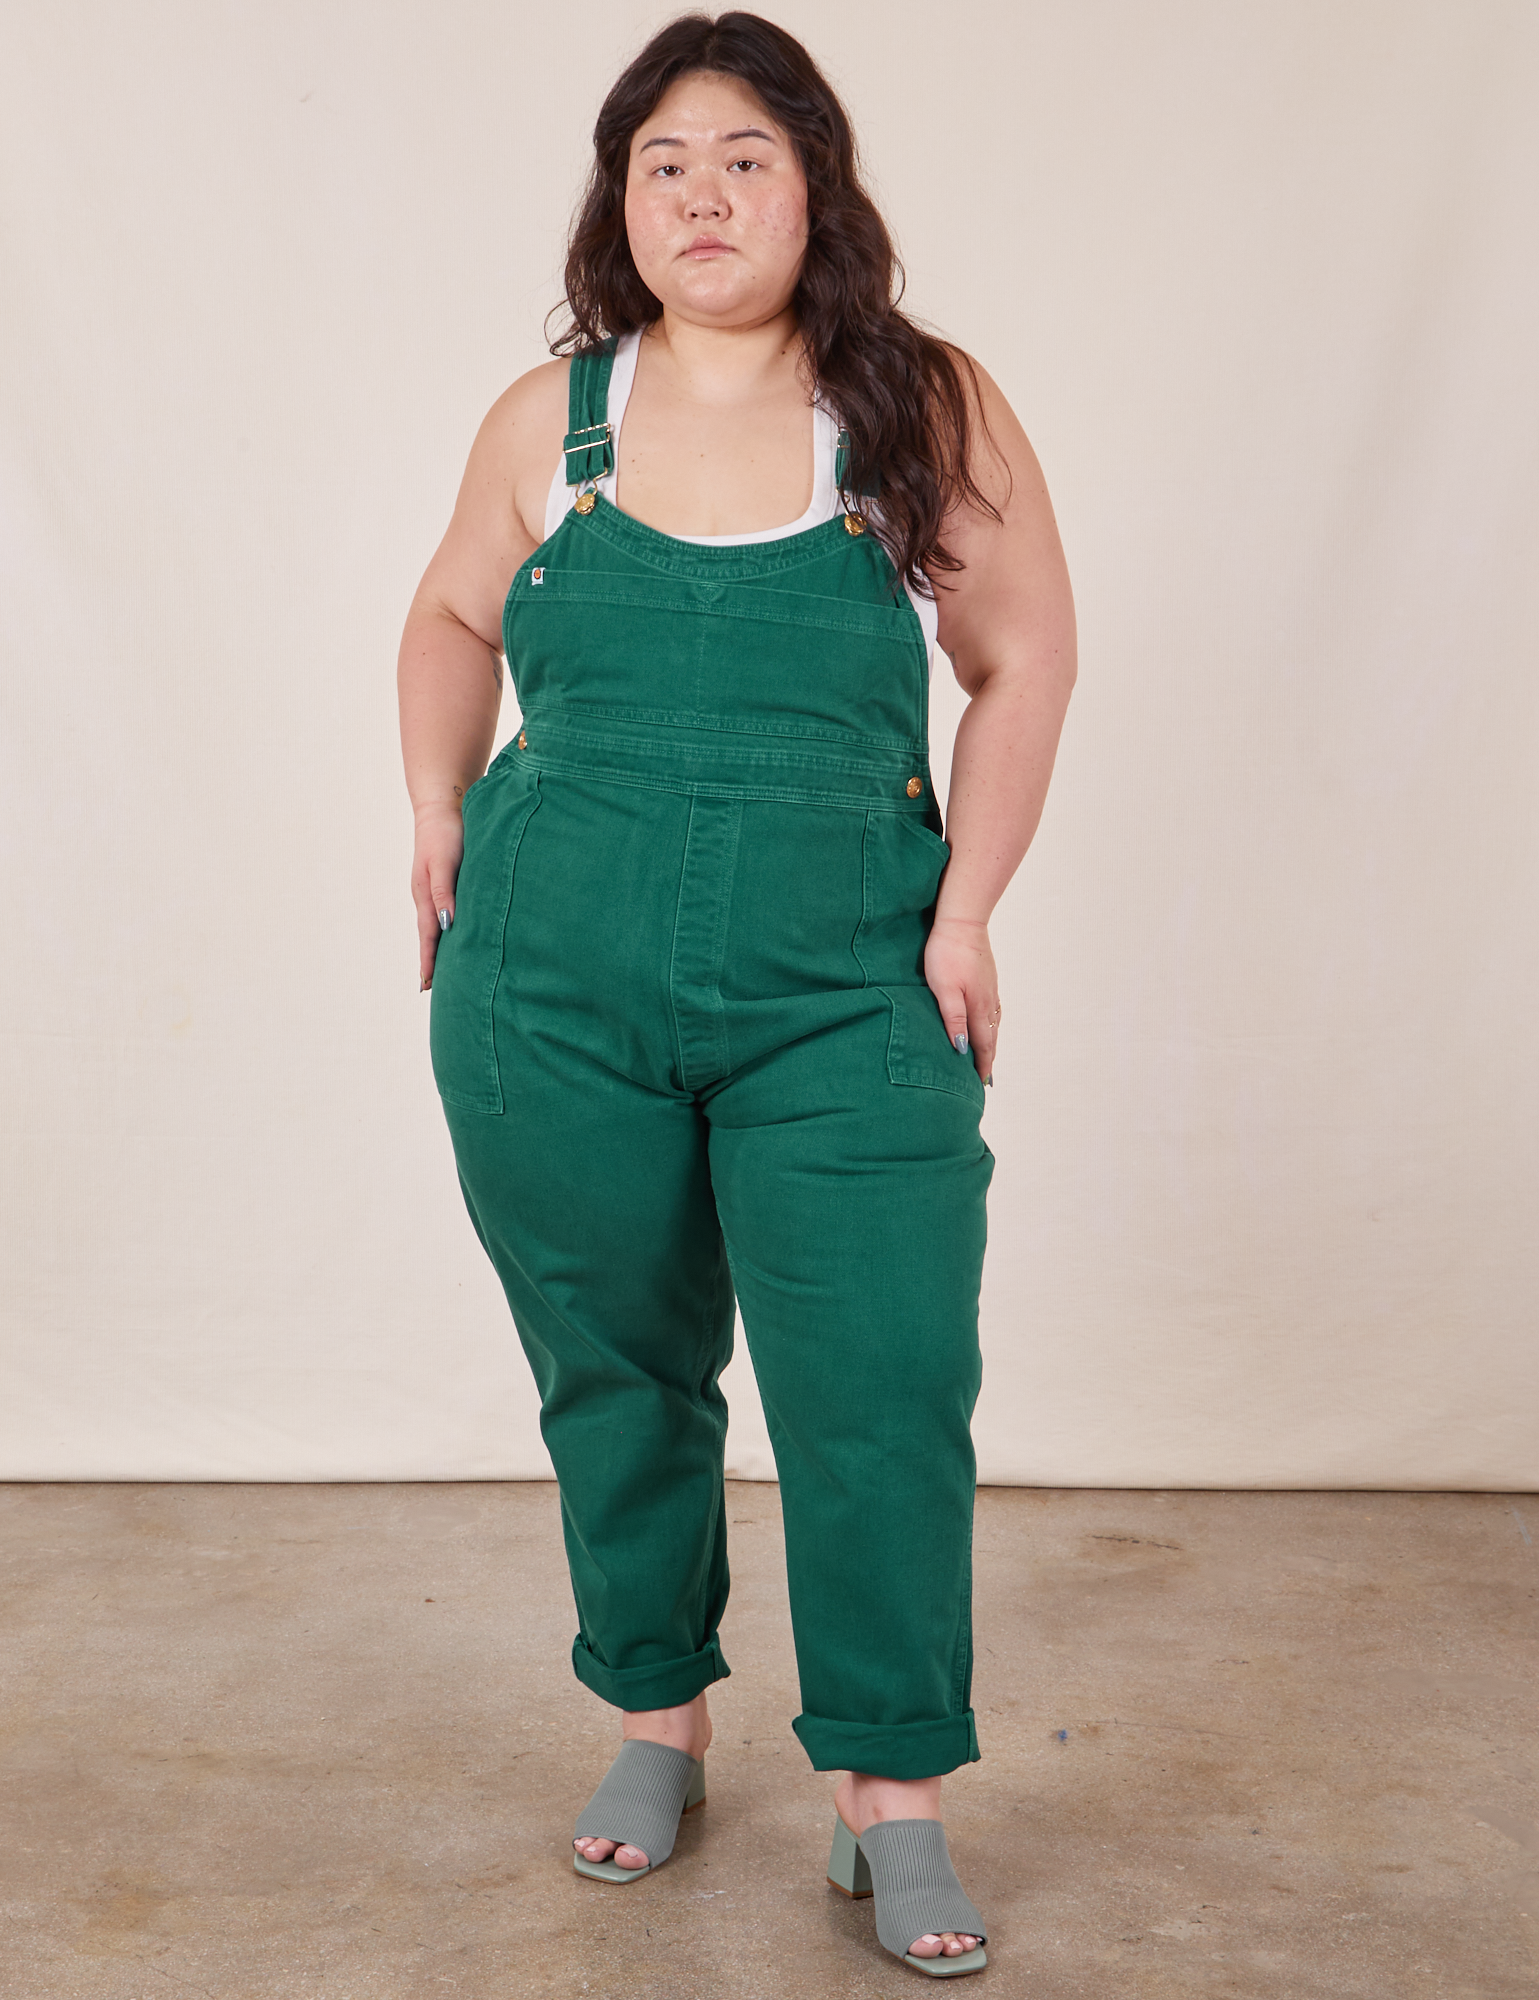 Ashley is 5&#39;7&quot; and wearing 1XL Original Overalls in Mono Hunter Green